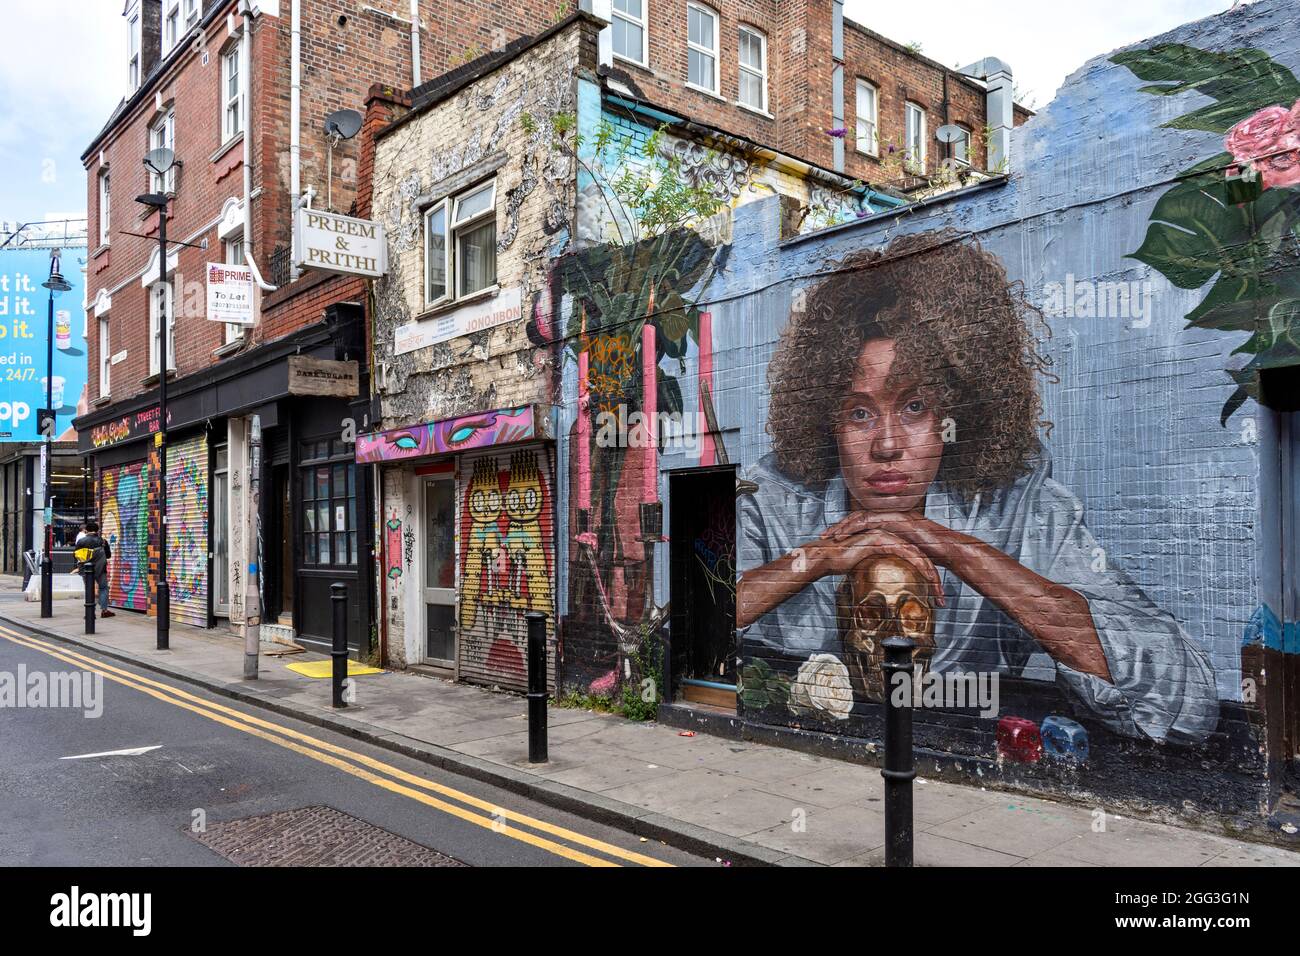 LONDON ARTISTIC AND CULTURAL AREA AROUND BRICK LANE WITH CREATIVE DESIGNS AND SLOGANS HANBURY STREET HOUSES AND WALLS Stock Photo